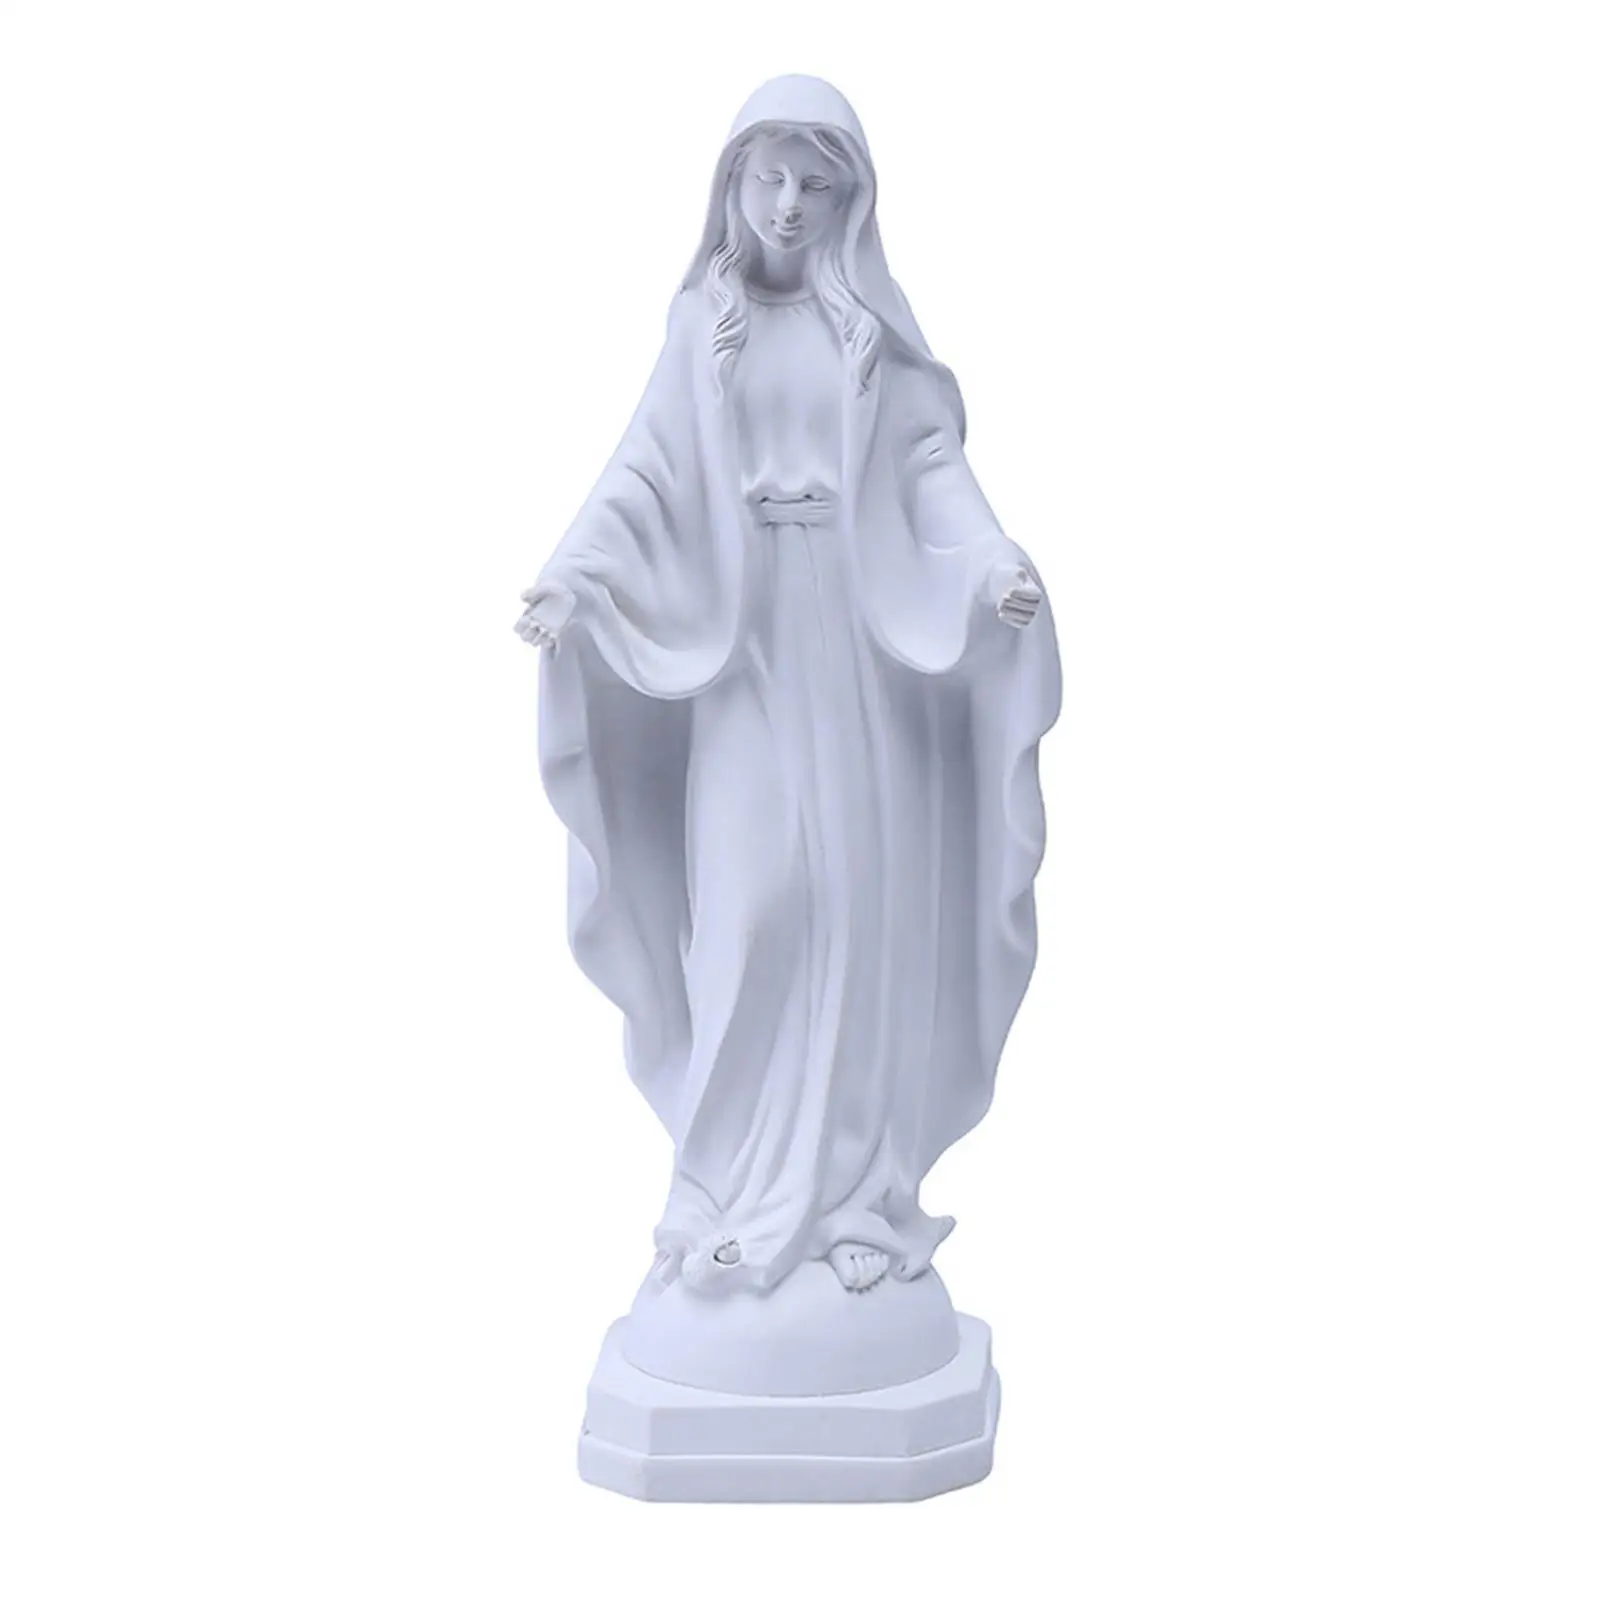 Blessed Resin Figurines Sculpture Catholic Figure Christian Art Pieces Virgin Mary Statue for Decors Living Room Christmas Home